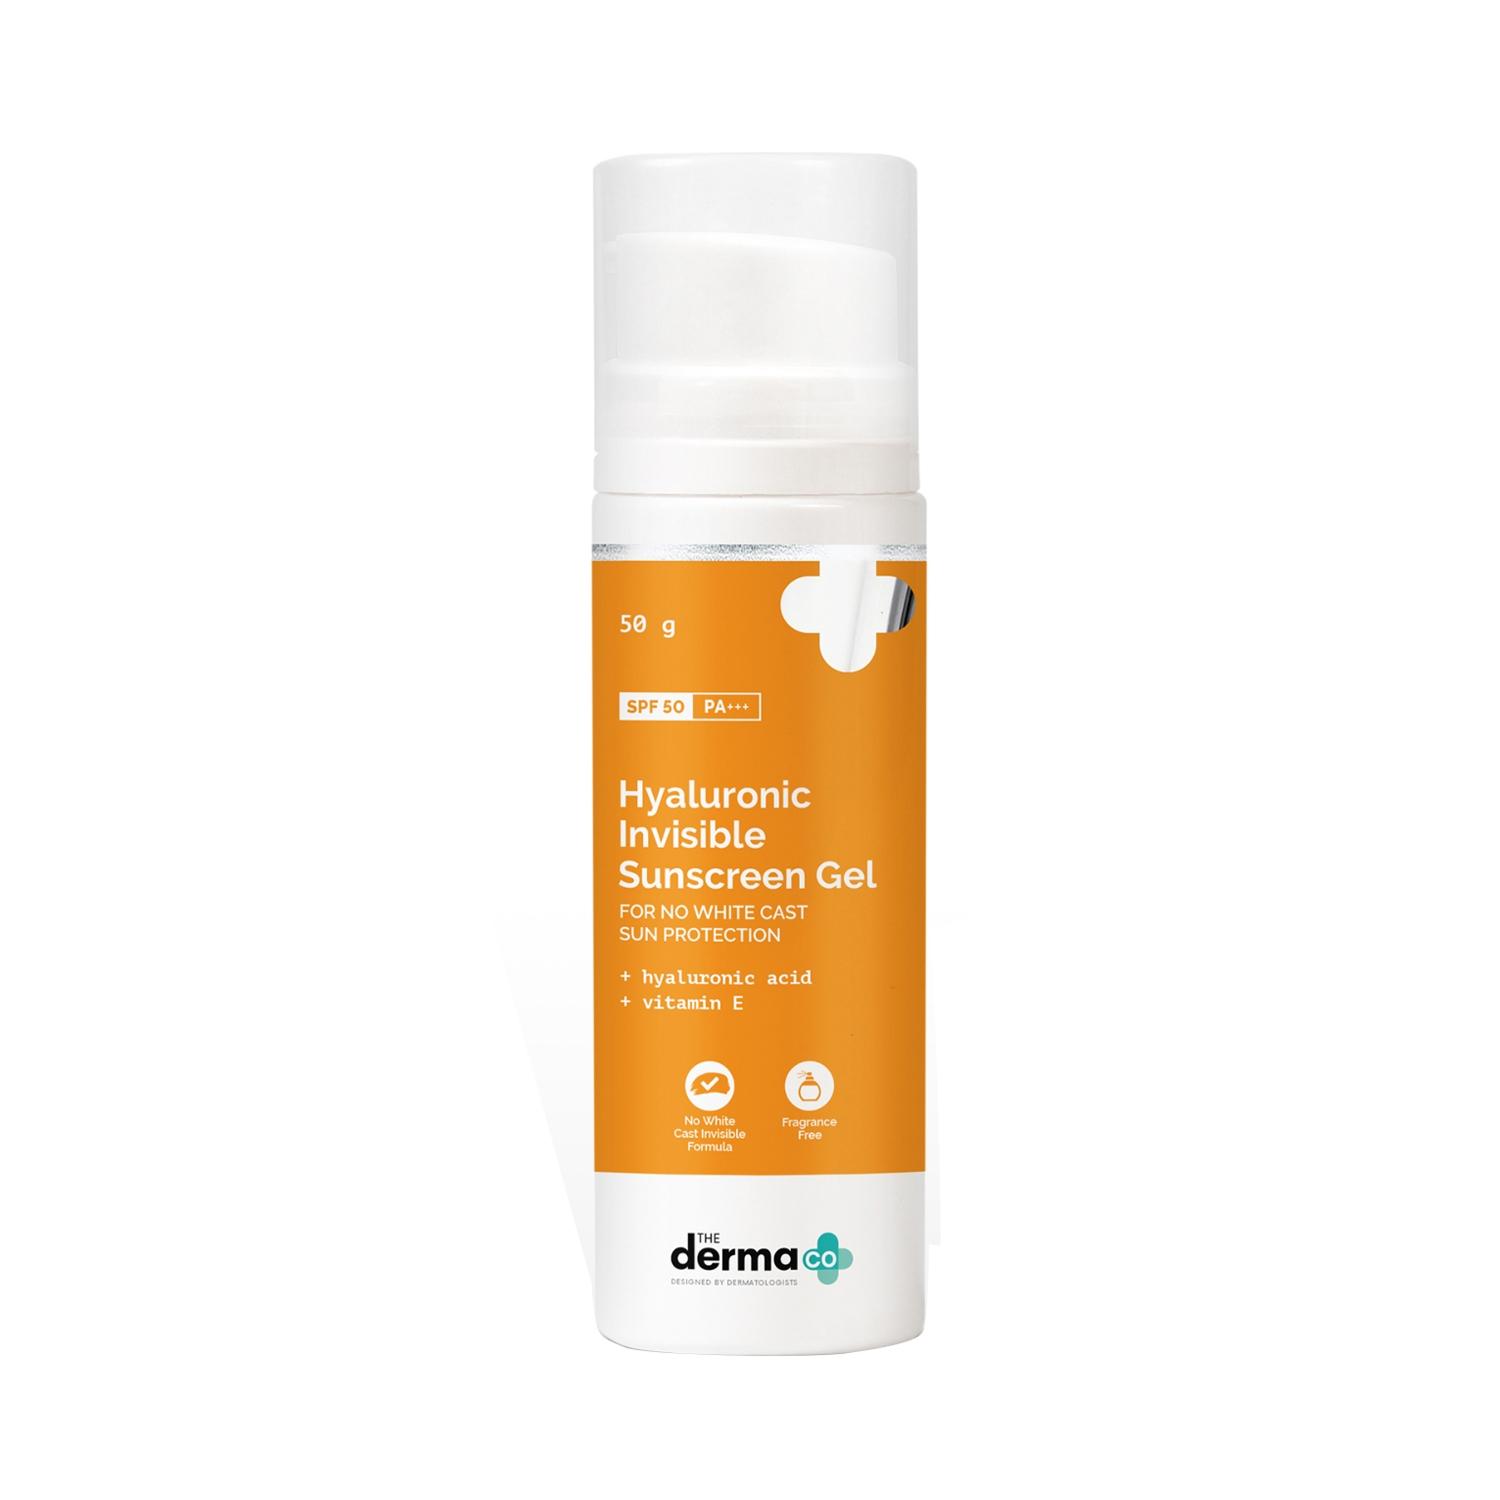 The Derma Co Hyaluronic Invisible Sunscreen Gel With SPF 50 PA++ (50g)